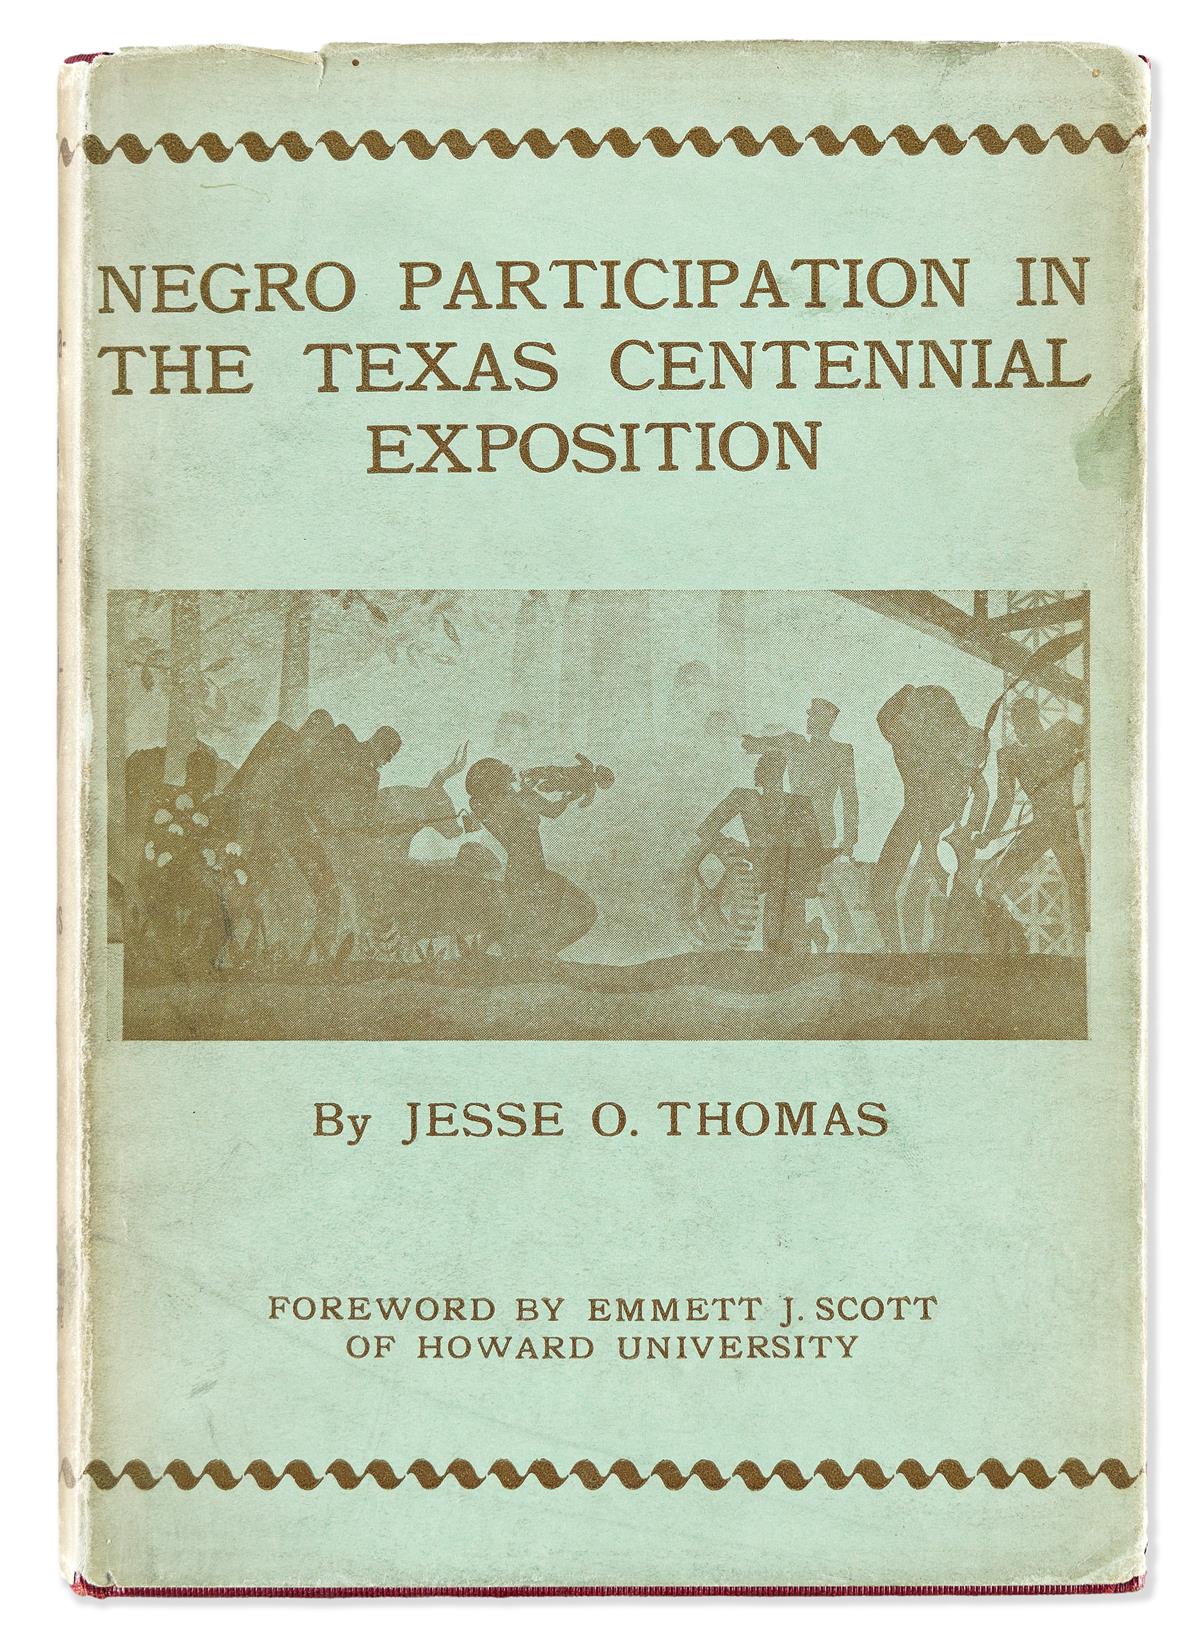 (CIVIL RIGHTS.) Jesse O. Thomas. Negro Participation in the Texas Centennial Exposition.